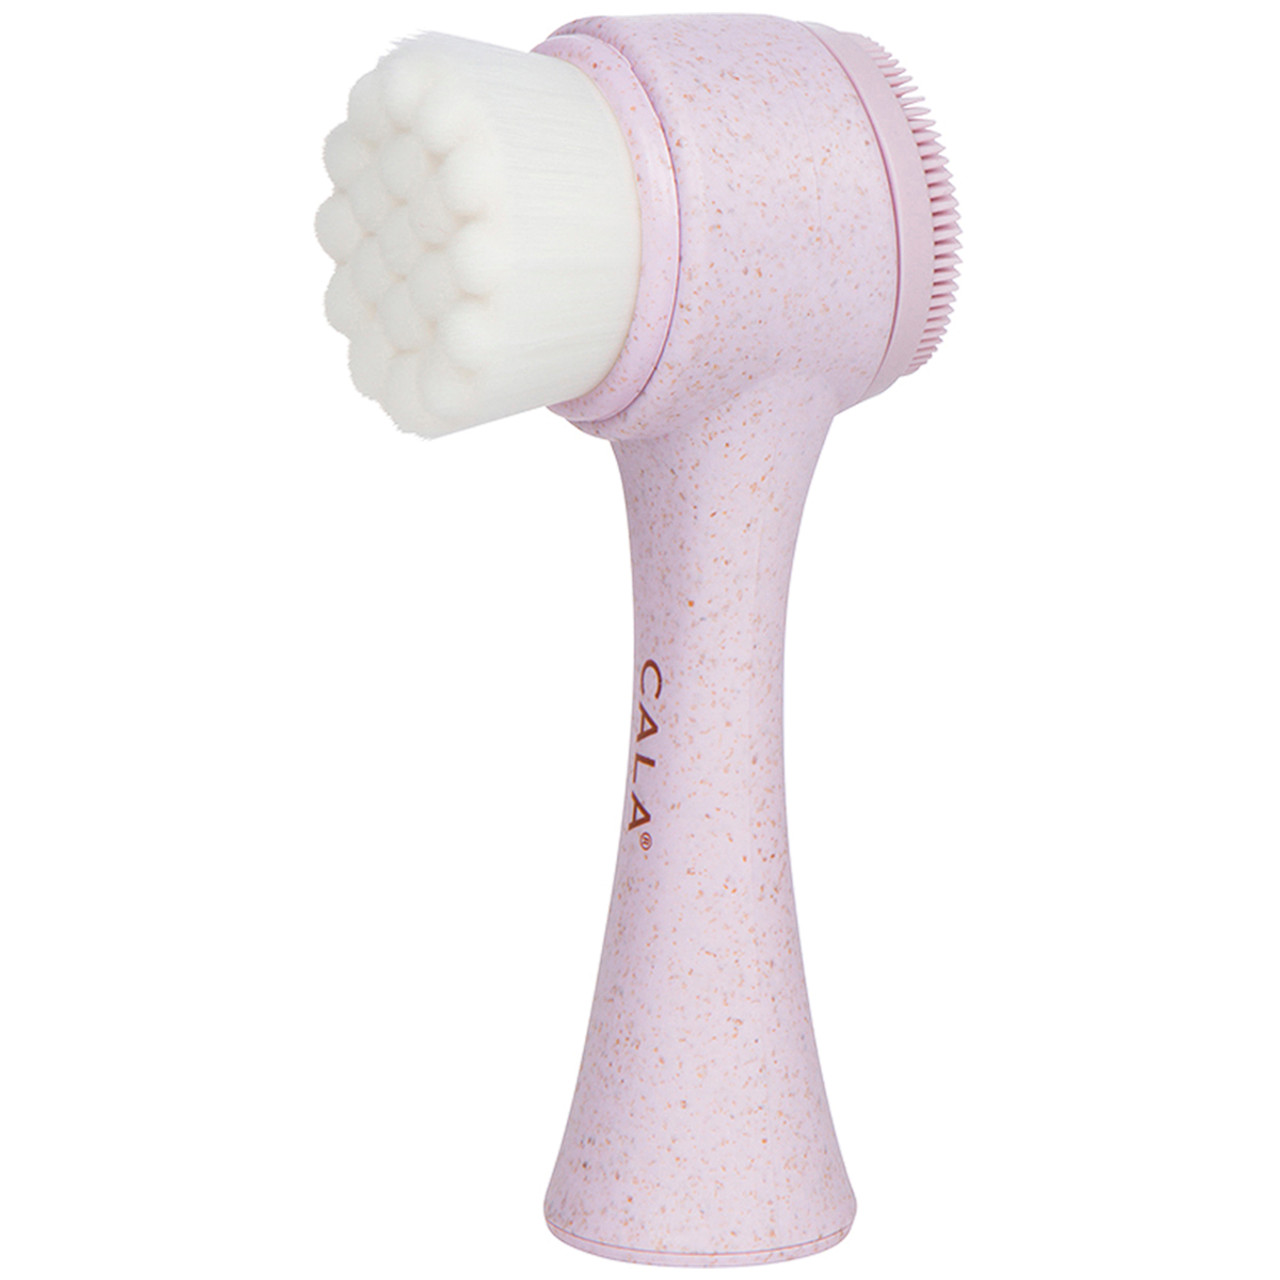 Silicone Sonic Facial Cleansing Brush & Massager